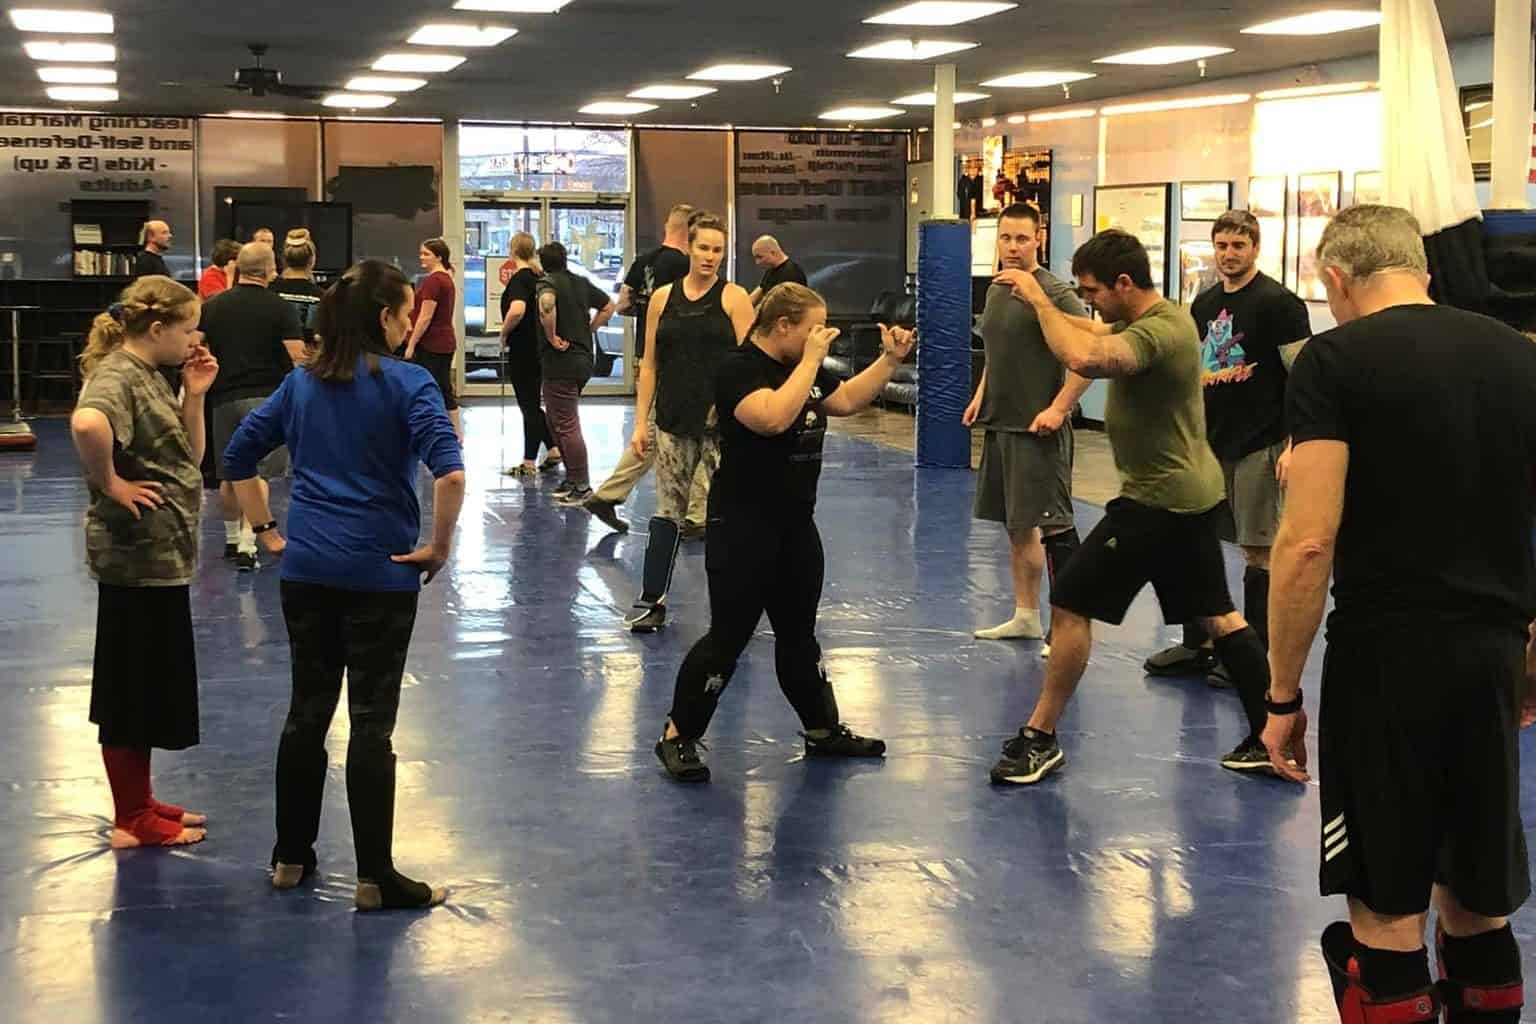 Come to Billings Krav Maga to learn self defense and get a great workout